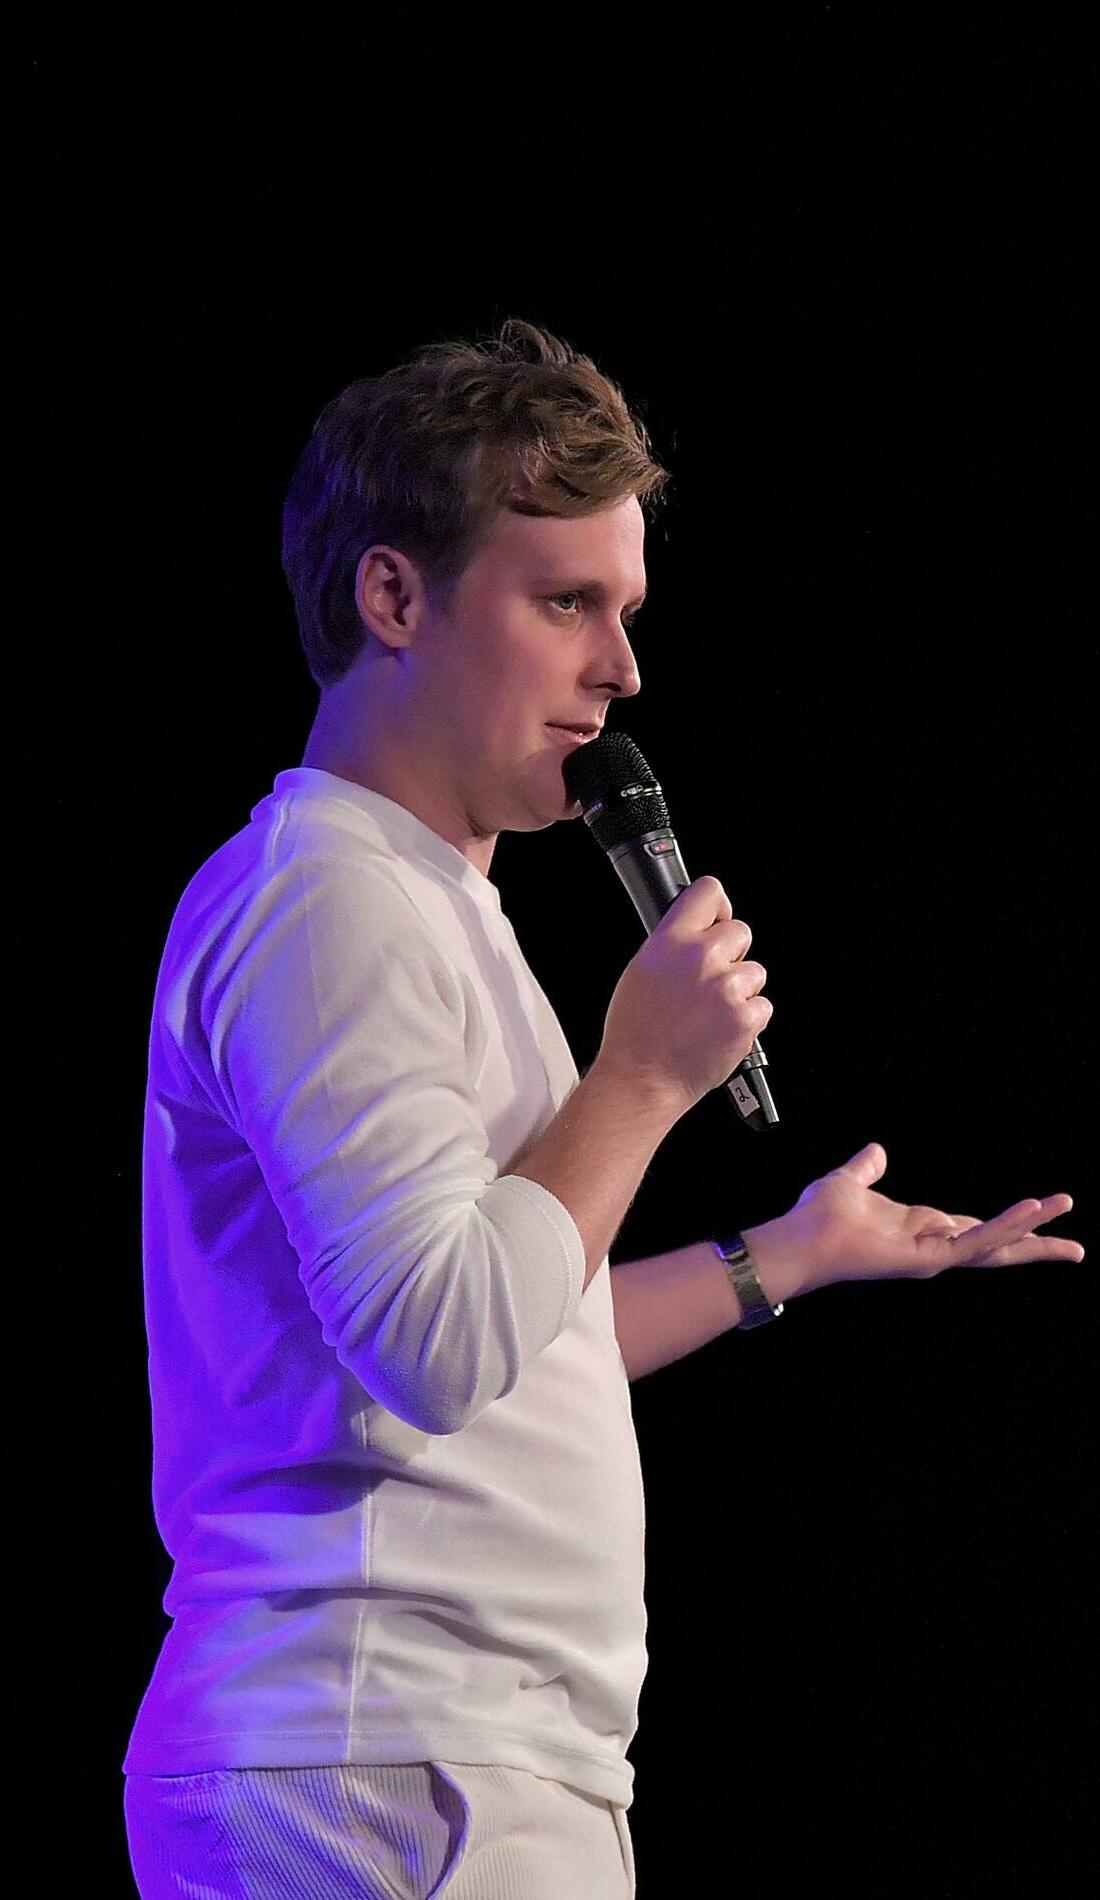 A John Early live event